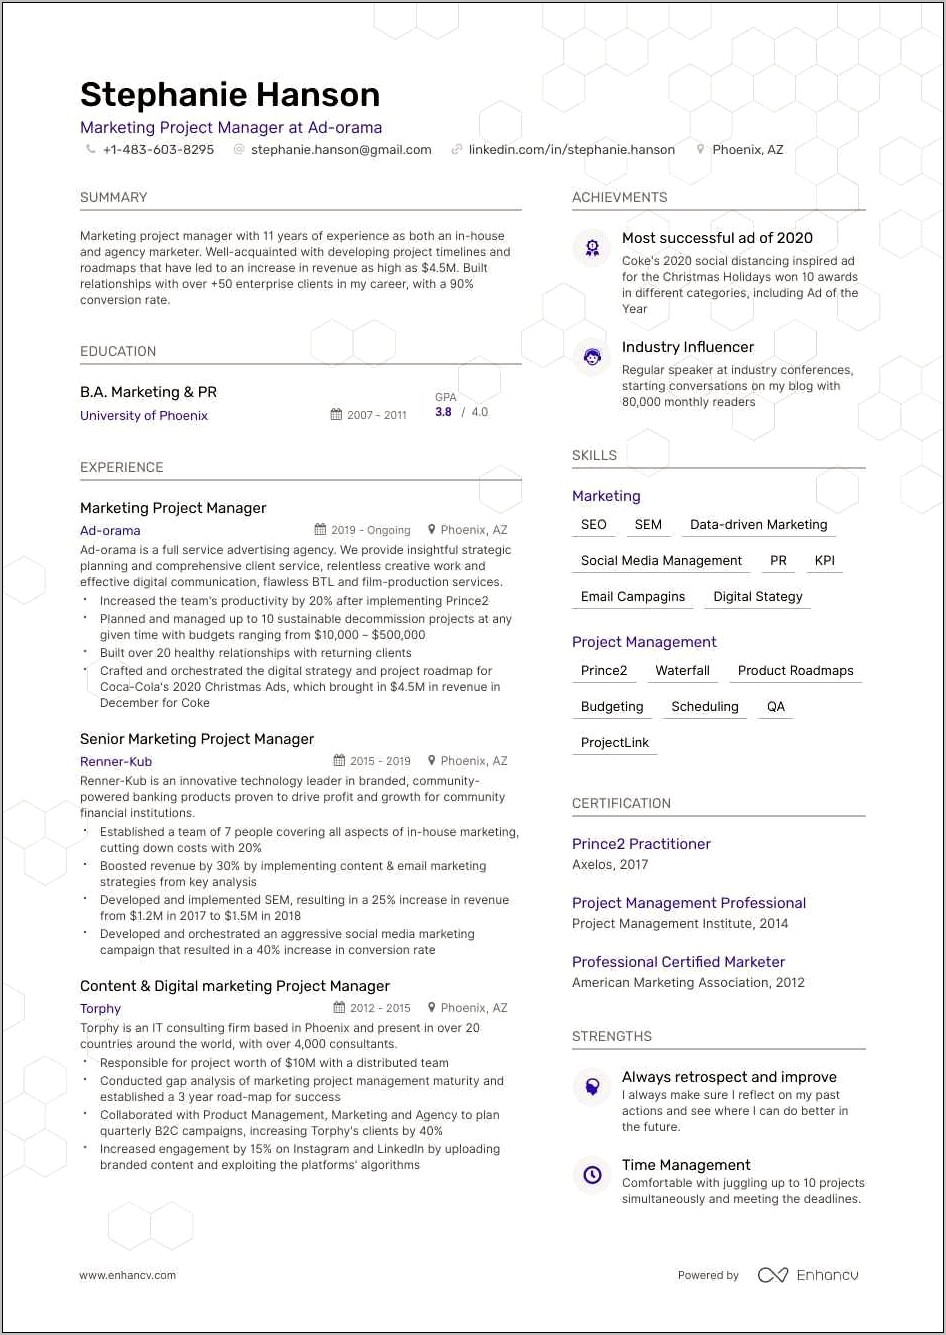 Resume Headline For Associate Project Manager